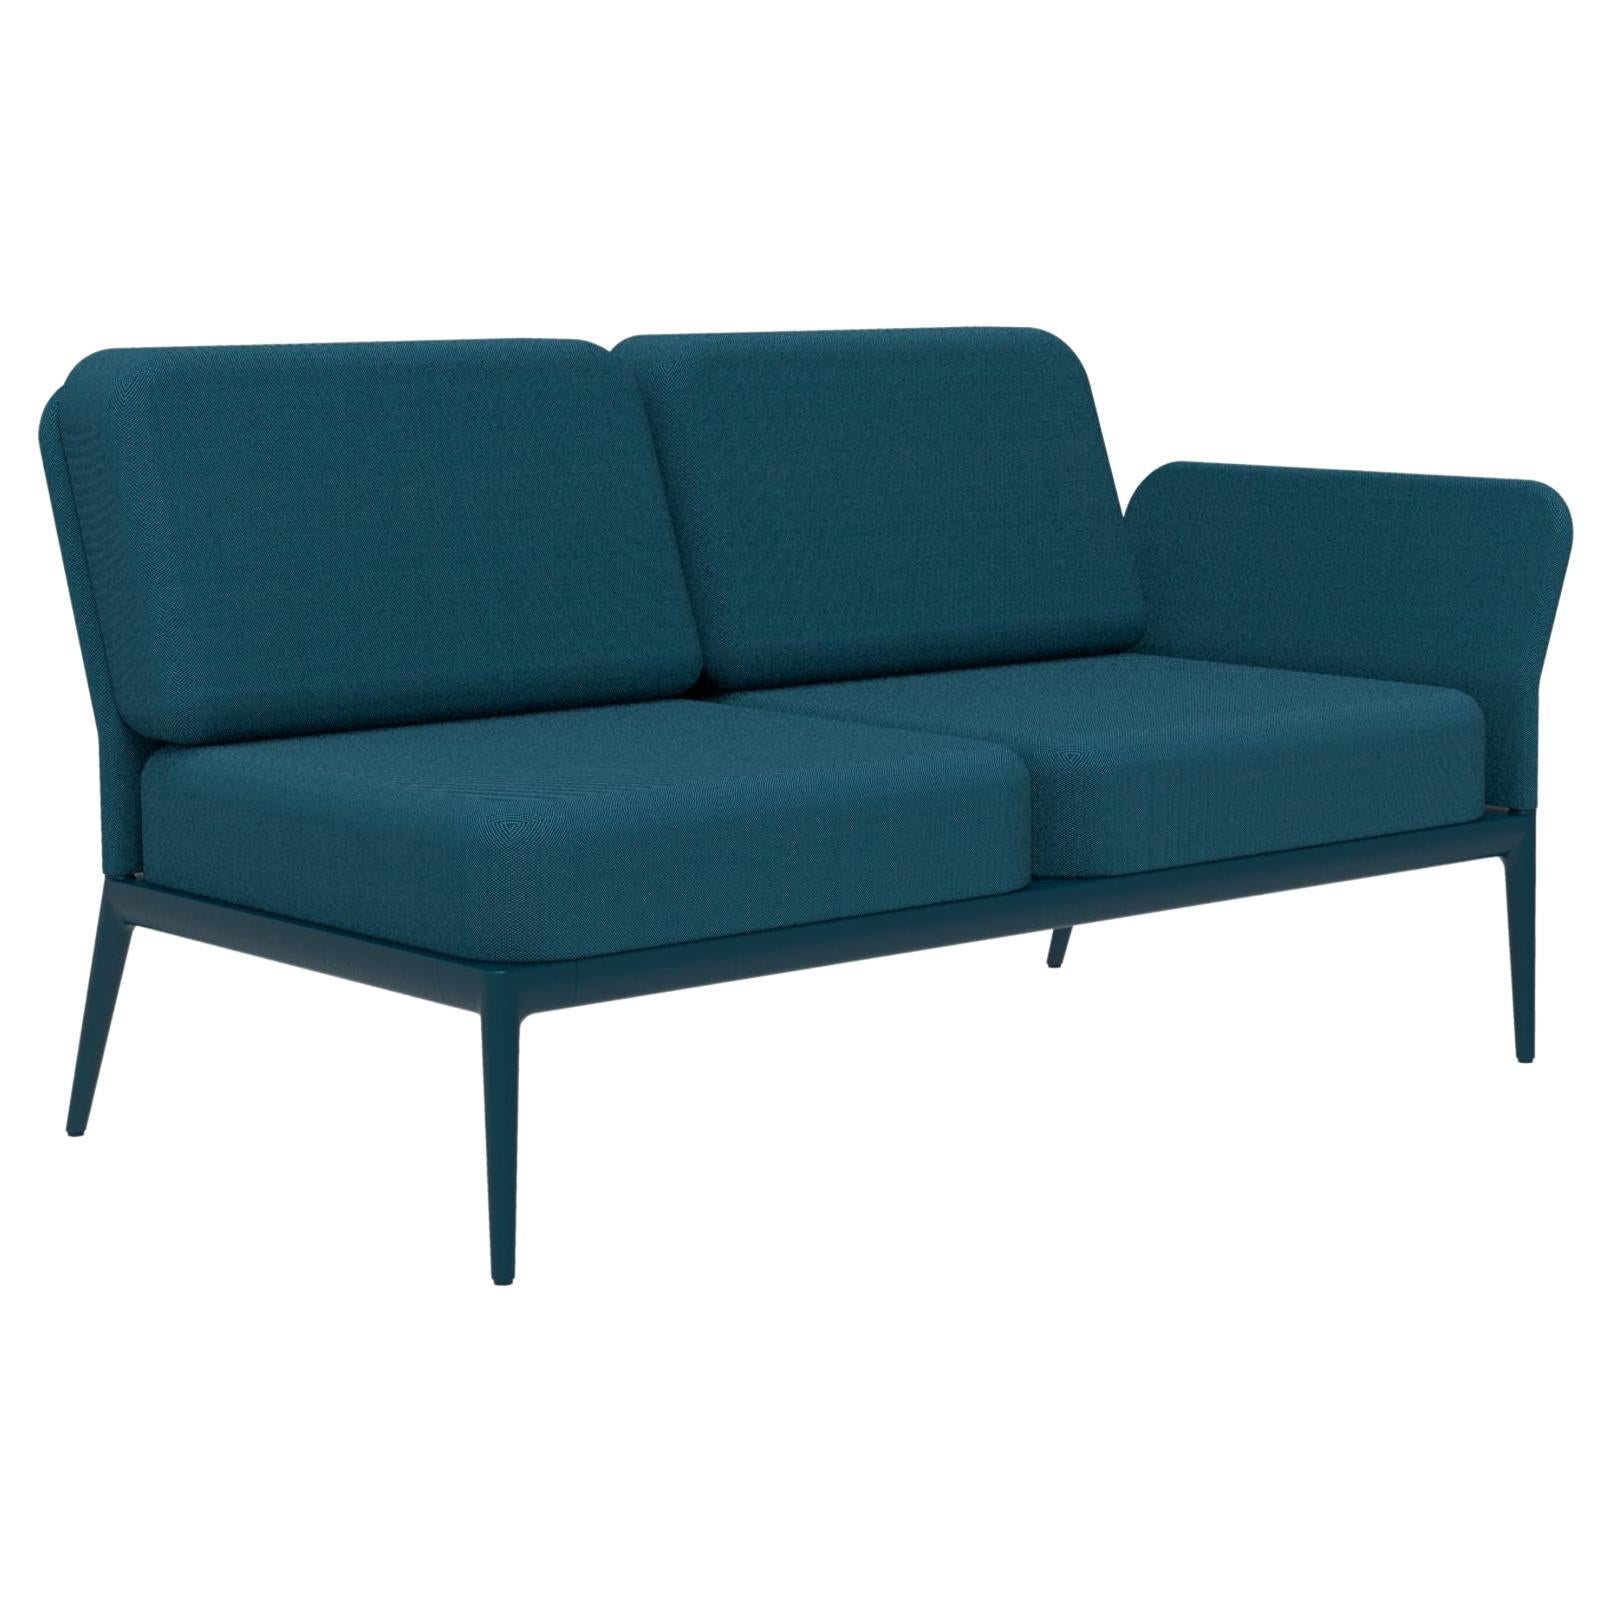 Cover Navy Double Left Modular Sofa by Mowee